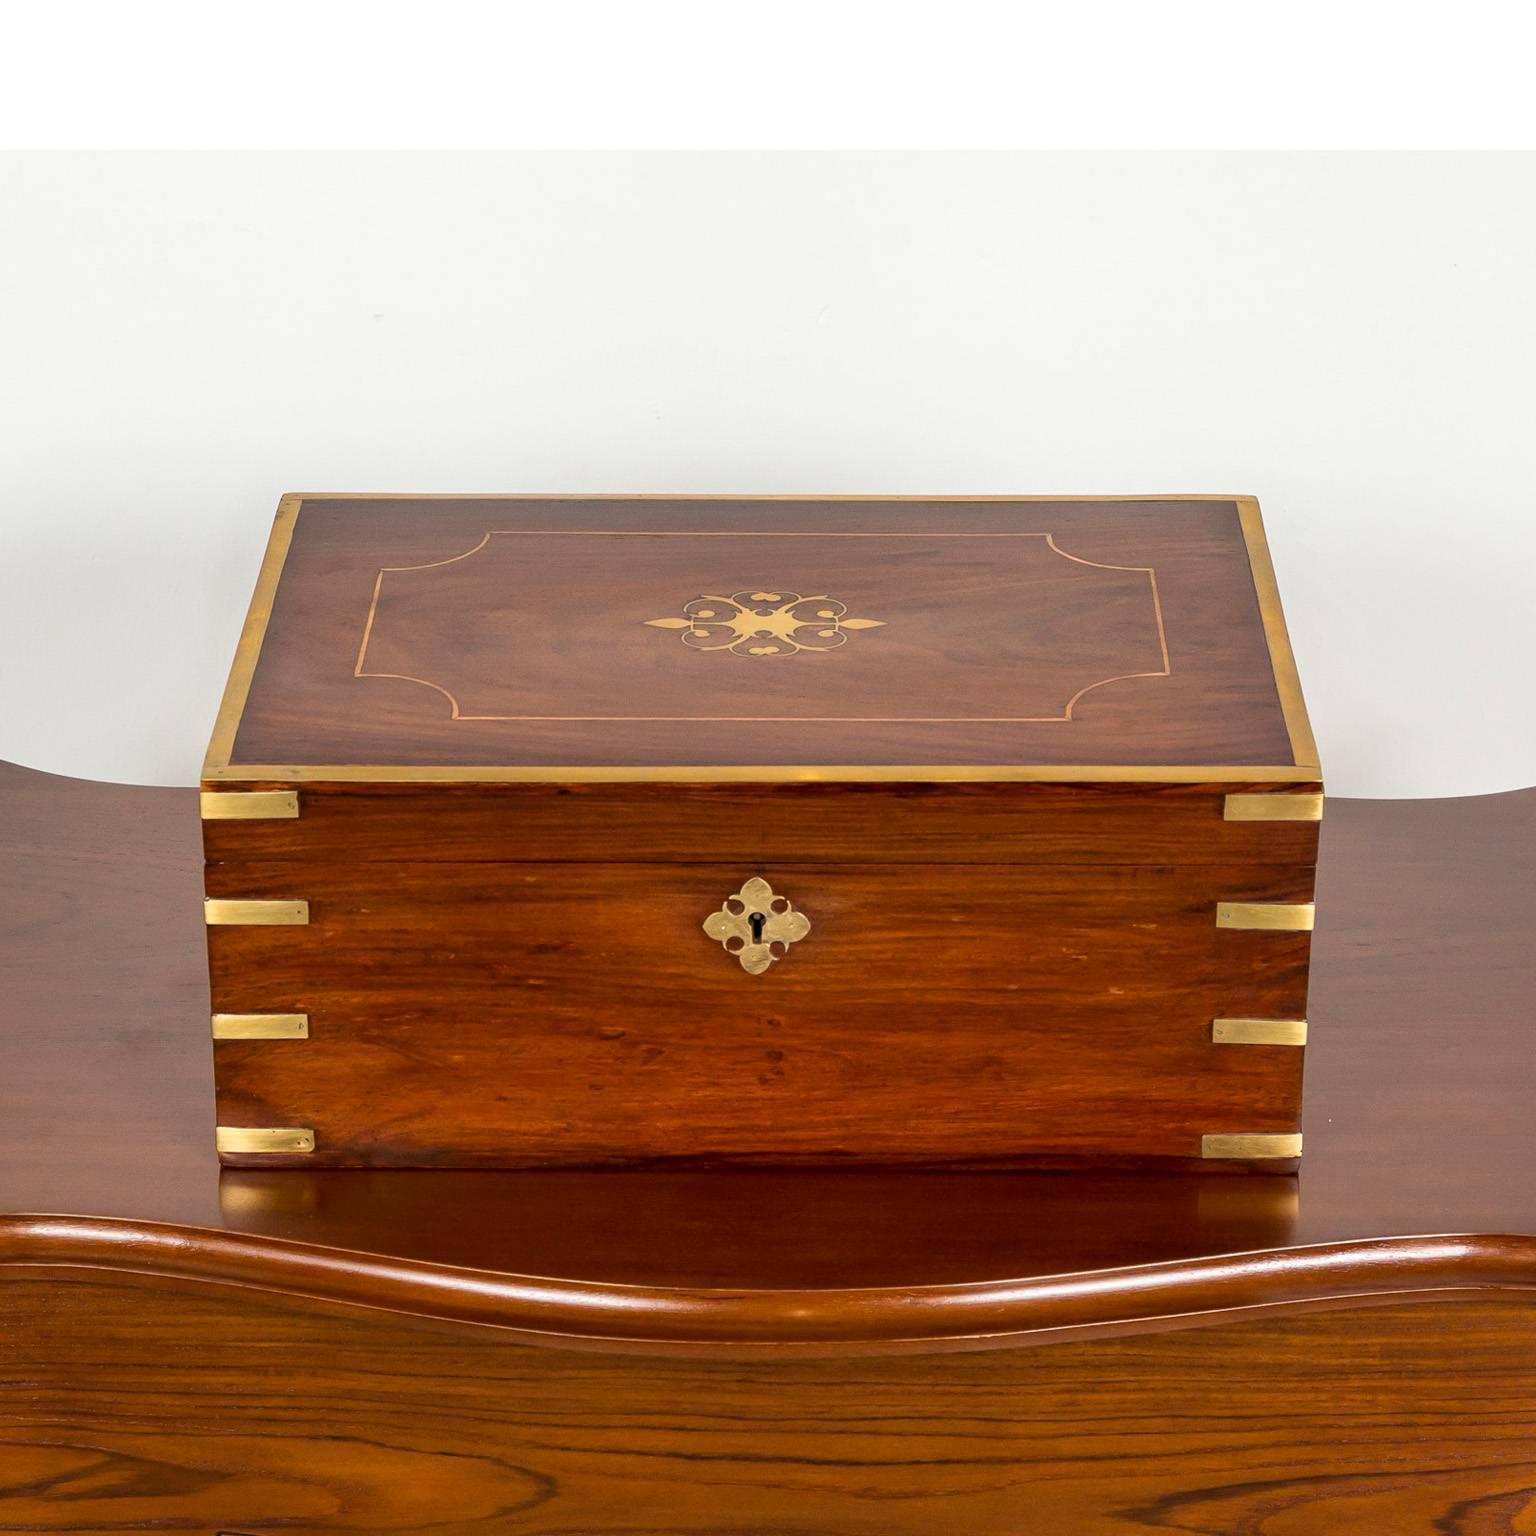 A beautiful British colonial rosewood dressing box with a brass ornament on the lid. The exterior reinforced with brass banding on the edges, both for decoration and protection. 
The box opens to a fitted interior with a mirror hinged on the